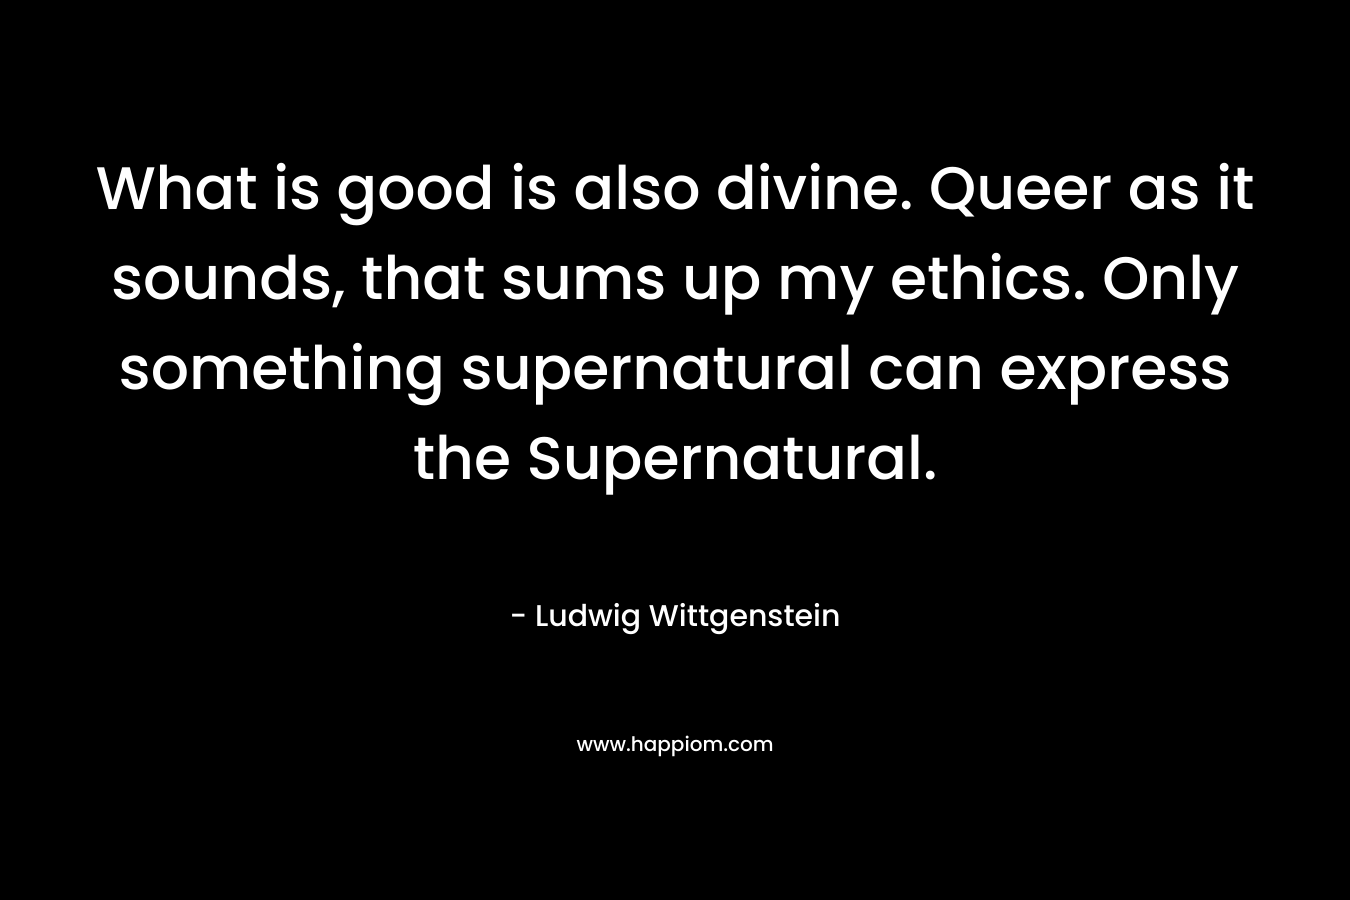 What is good is also divine. Queer as it sounds, that sums up my ethics. Only something supernatural can express the Supernatural.